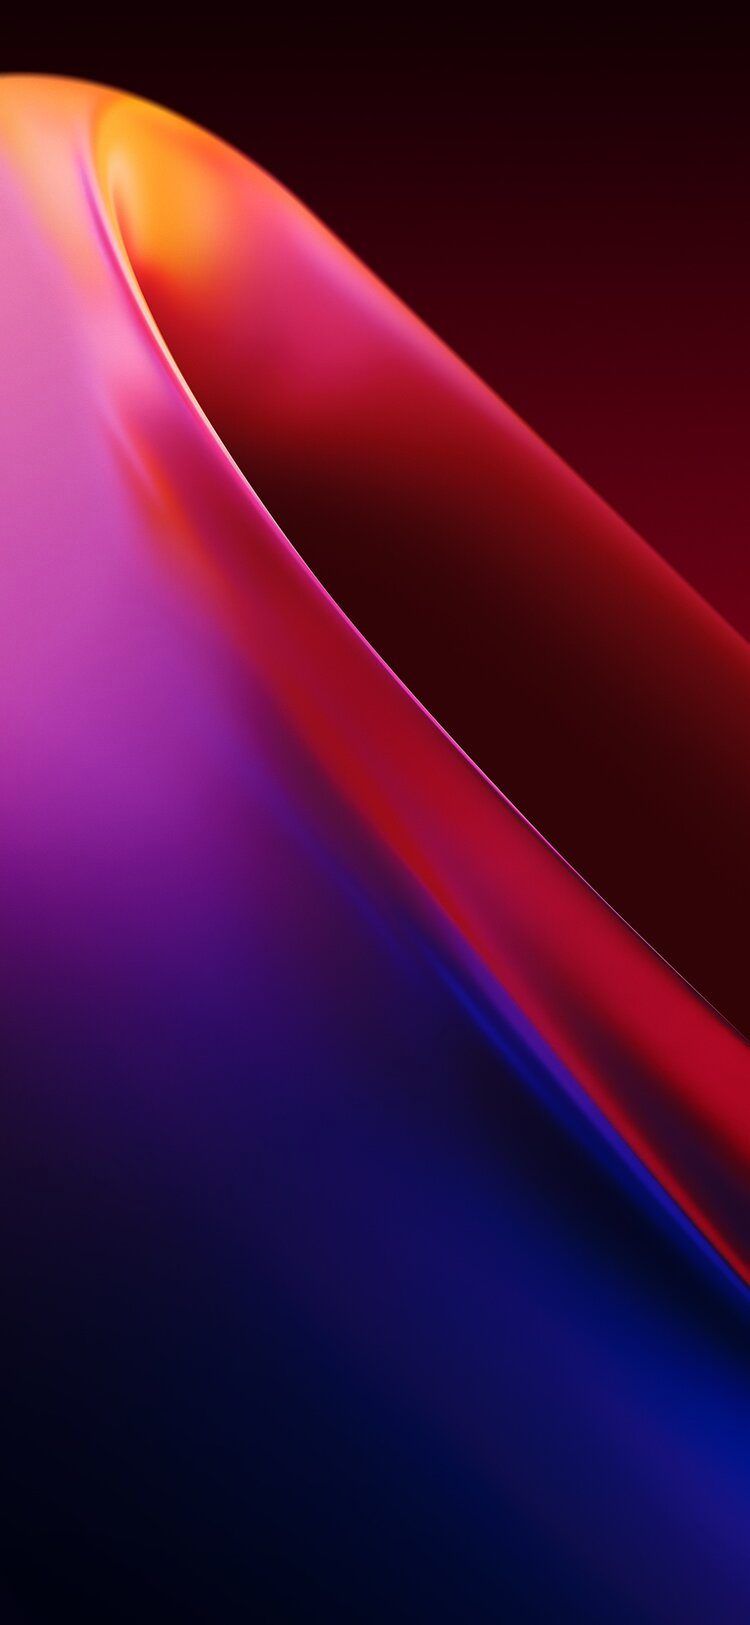 How to download the OnePlus 7T wallpaper to your phone